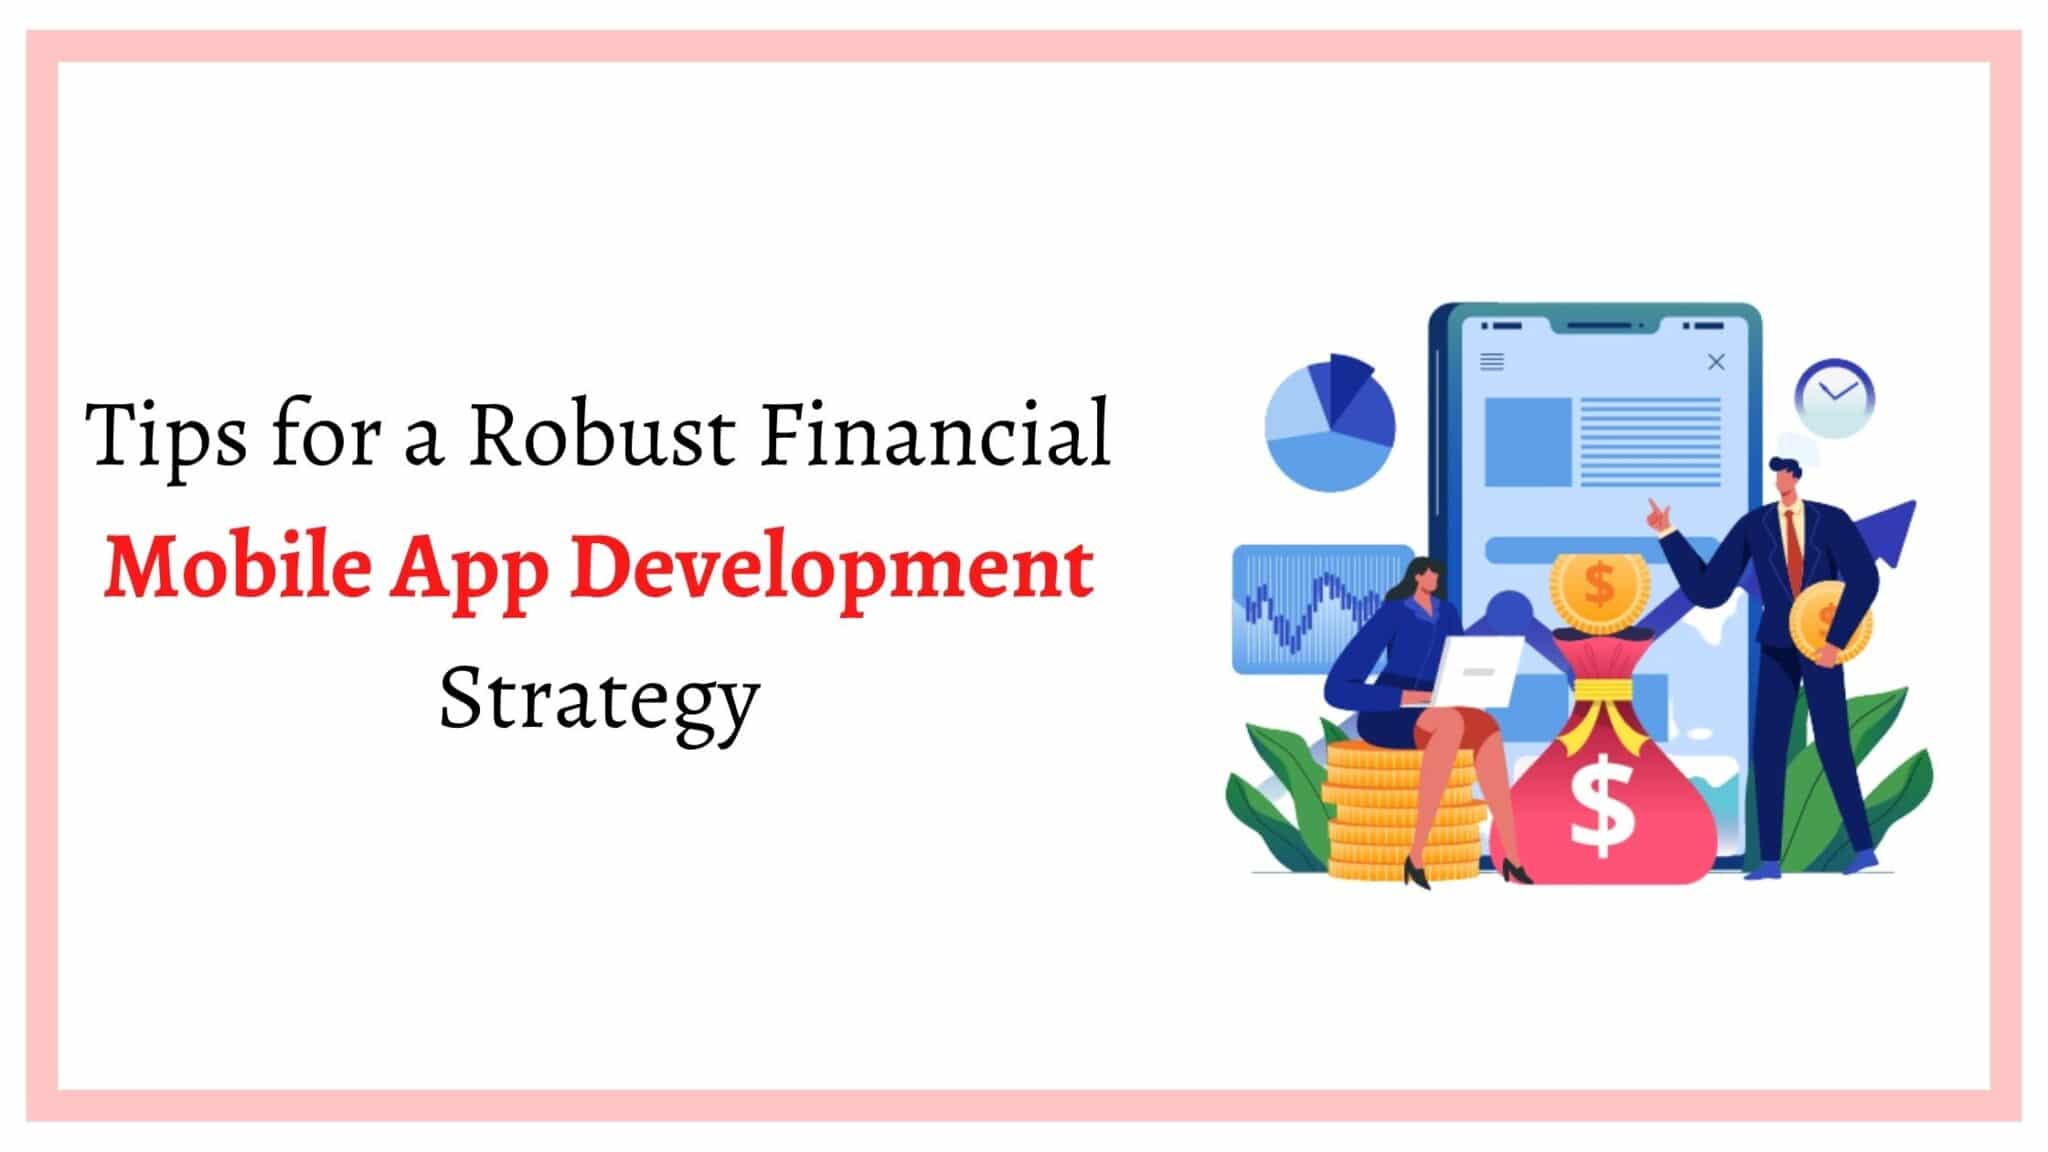 Tips for a Robust Financial Mobile App Development Strategy-8bea4f81